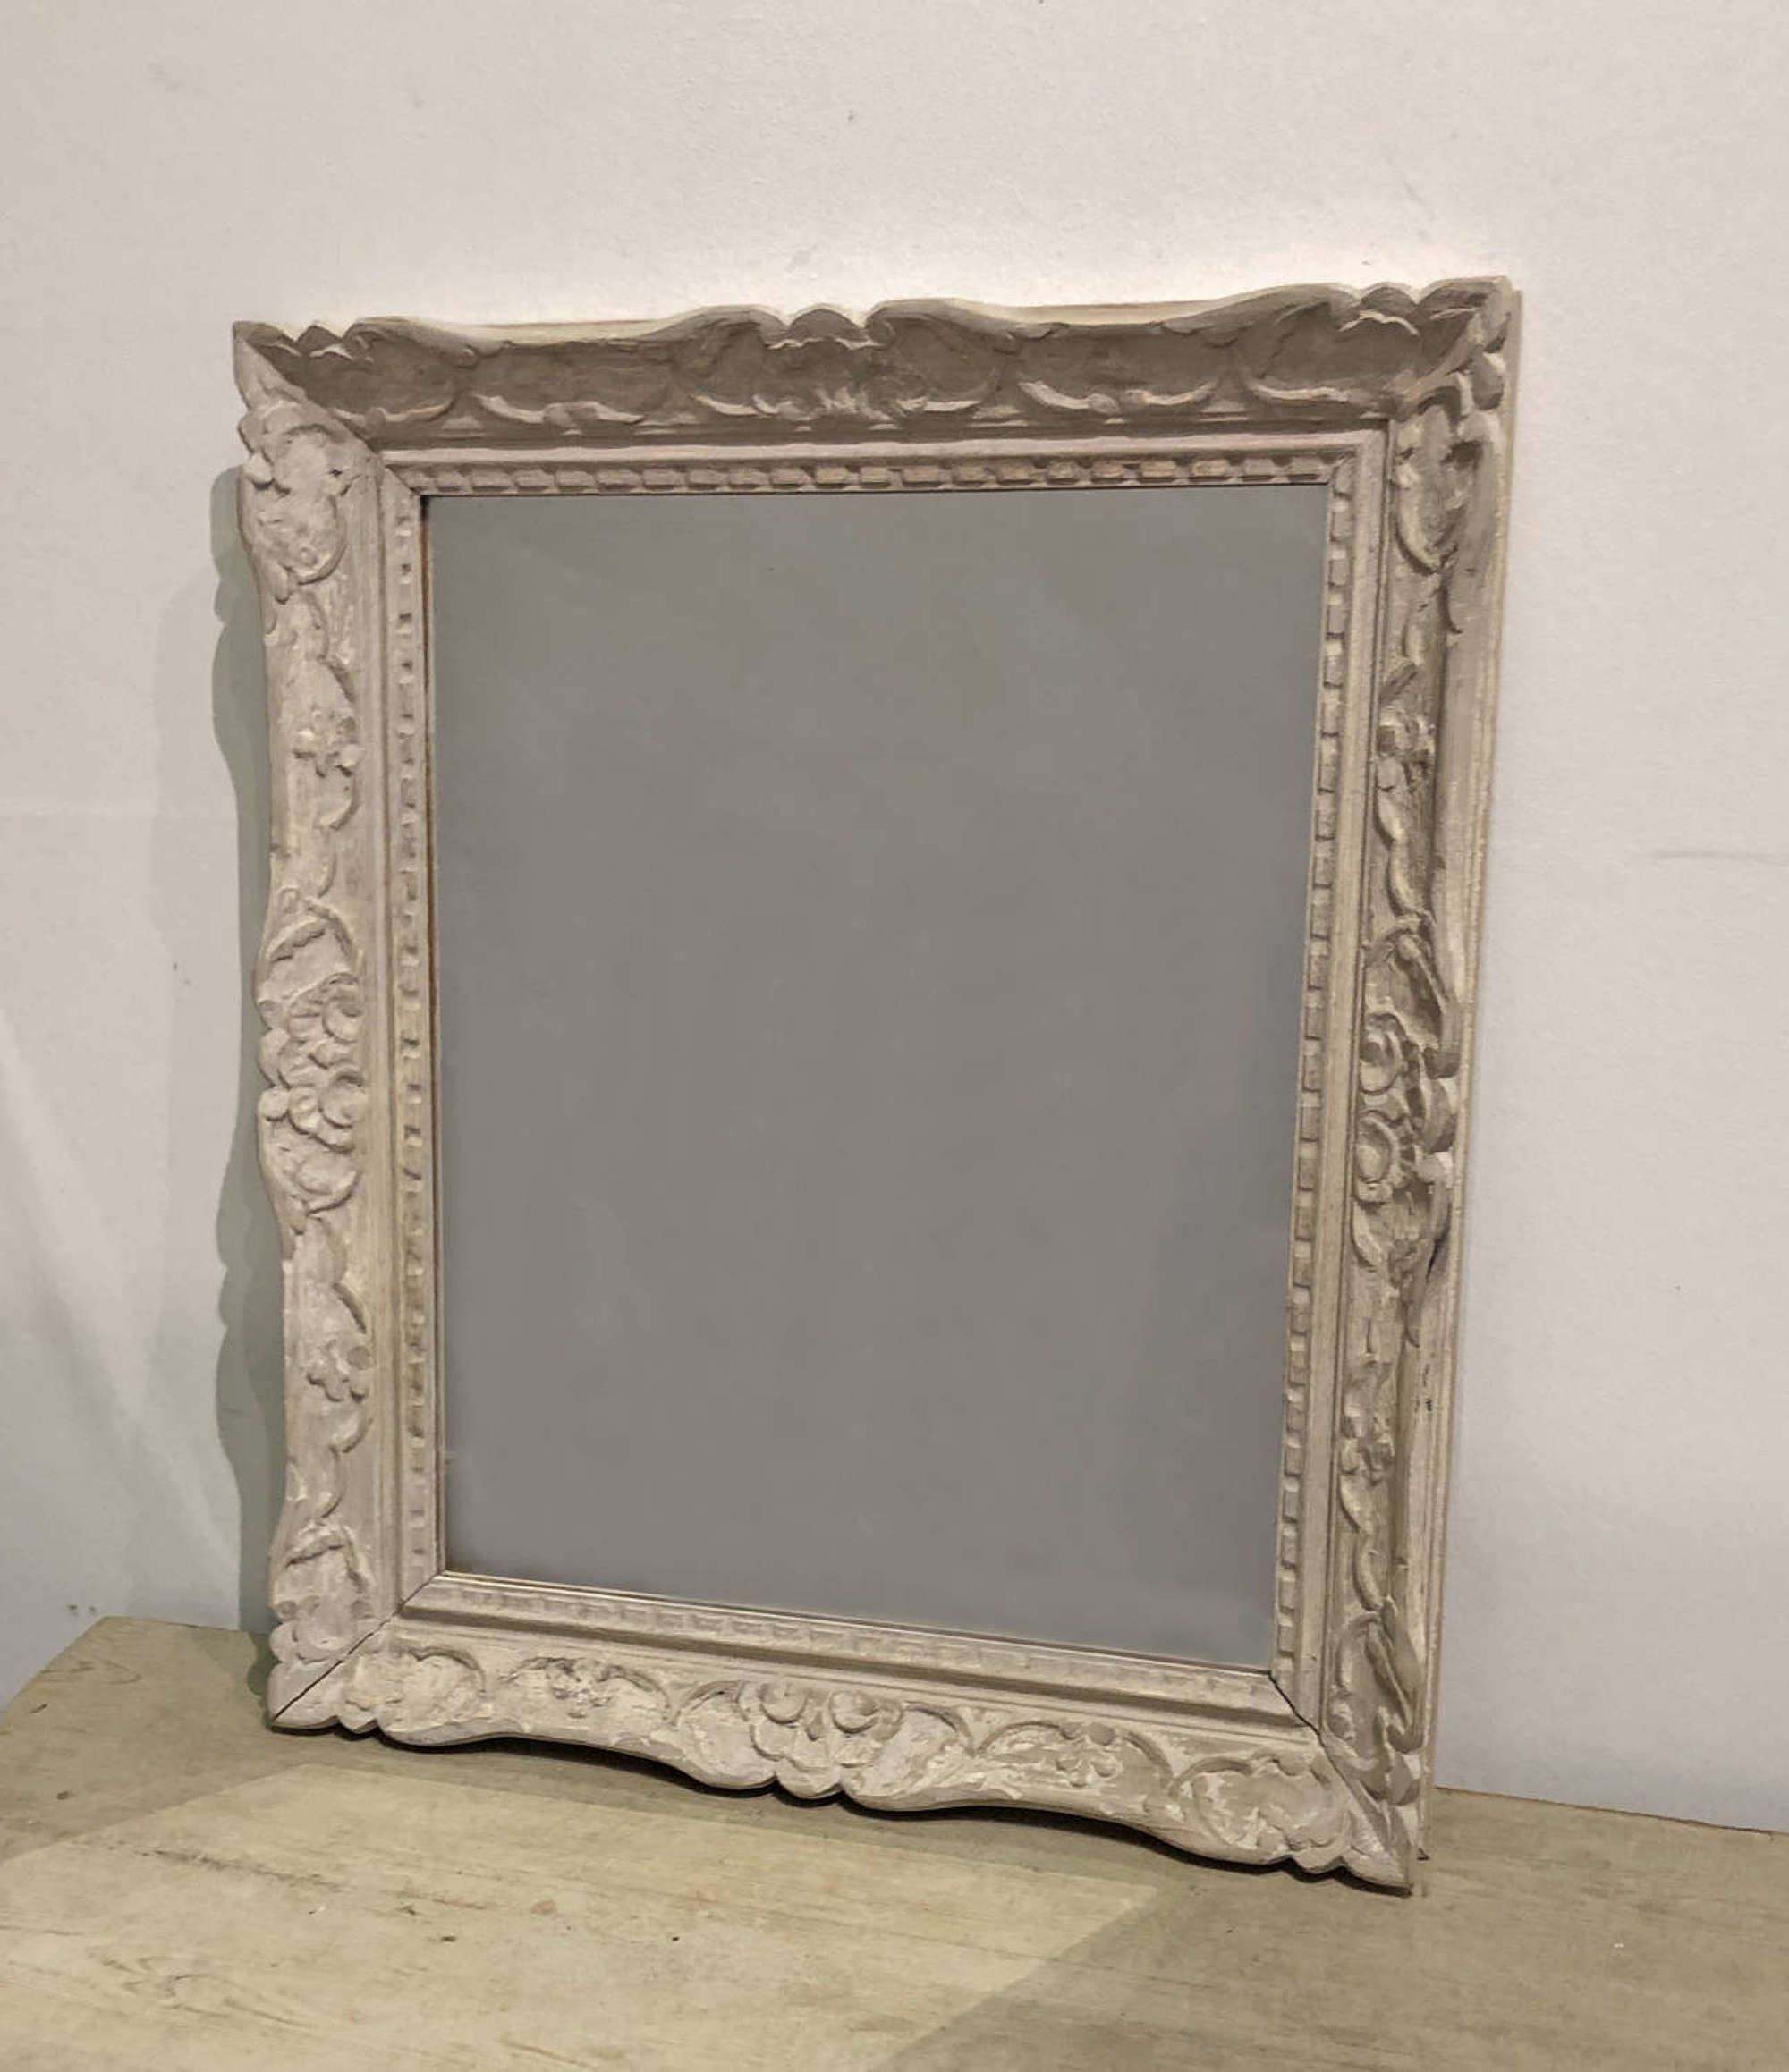 Small 19th c French carved framed Mirror - circa 1890